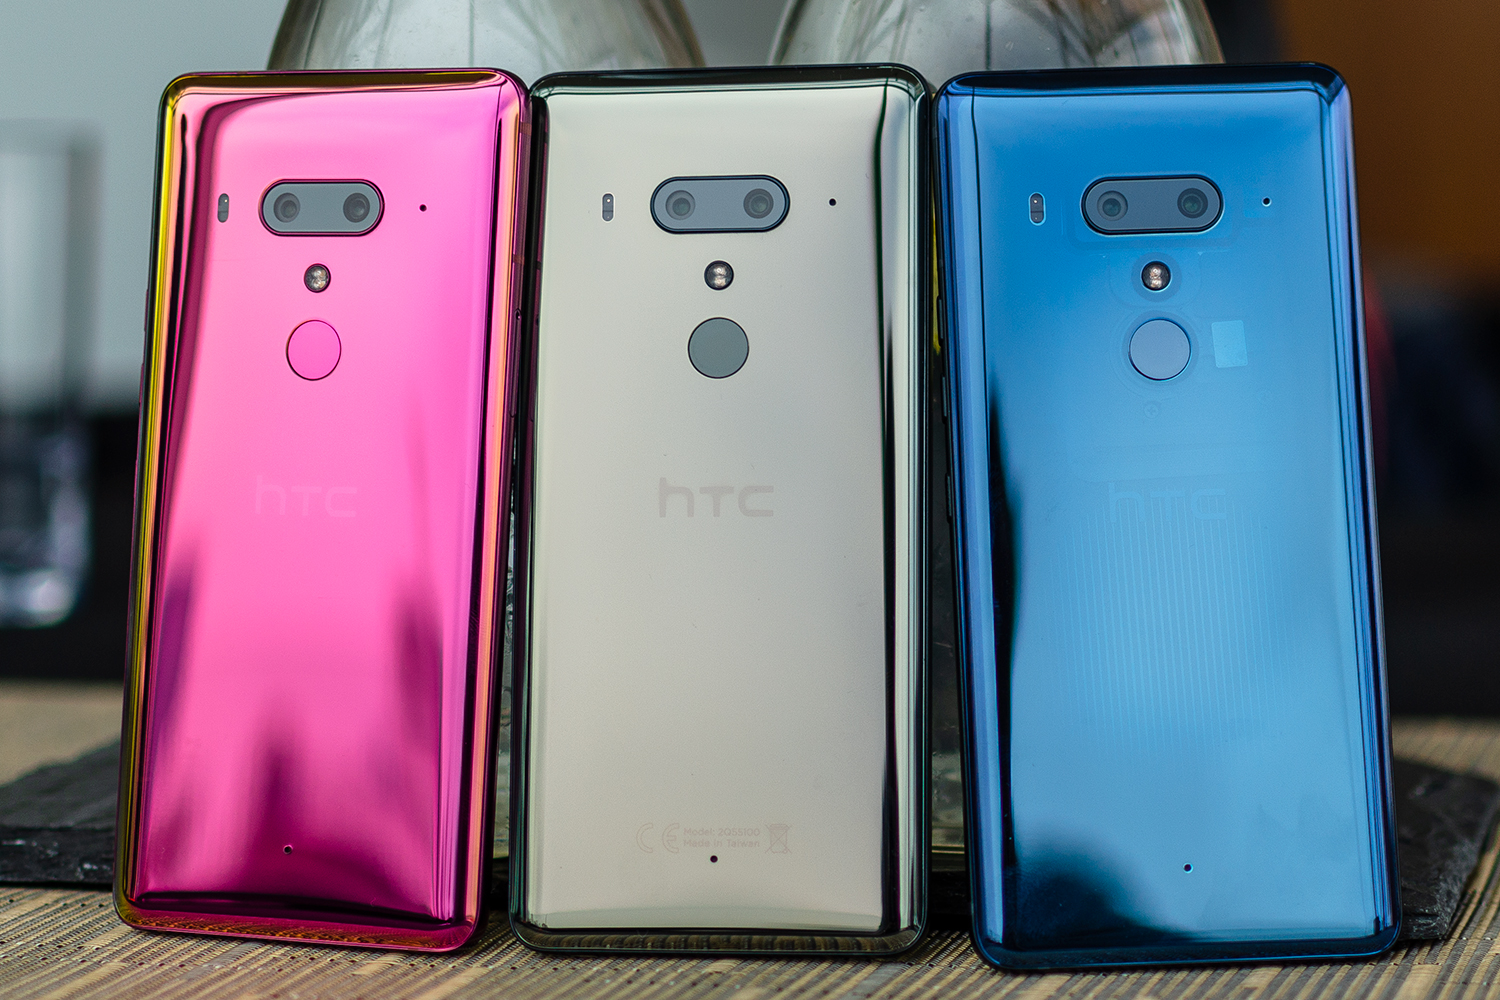 Botanist melody Key HTC U12 Plus: Everything You Need to Know About HTC's New Phone | Digital  Trends